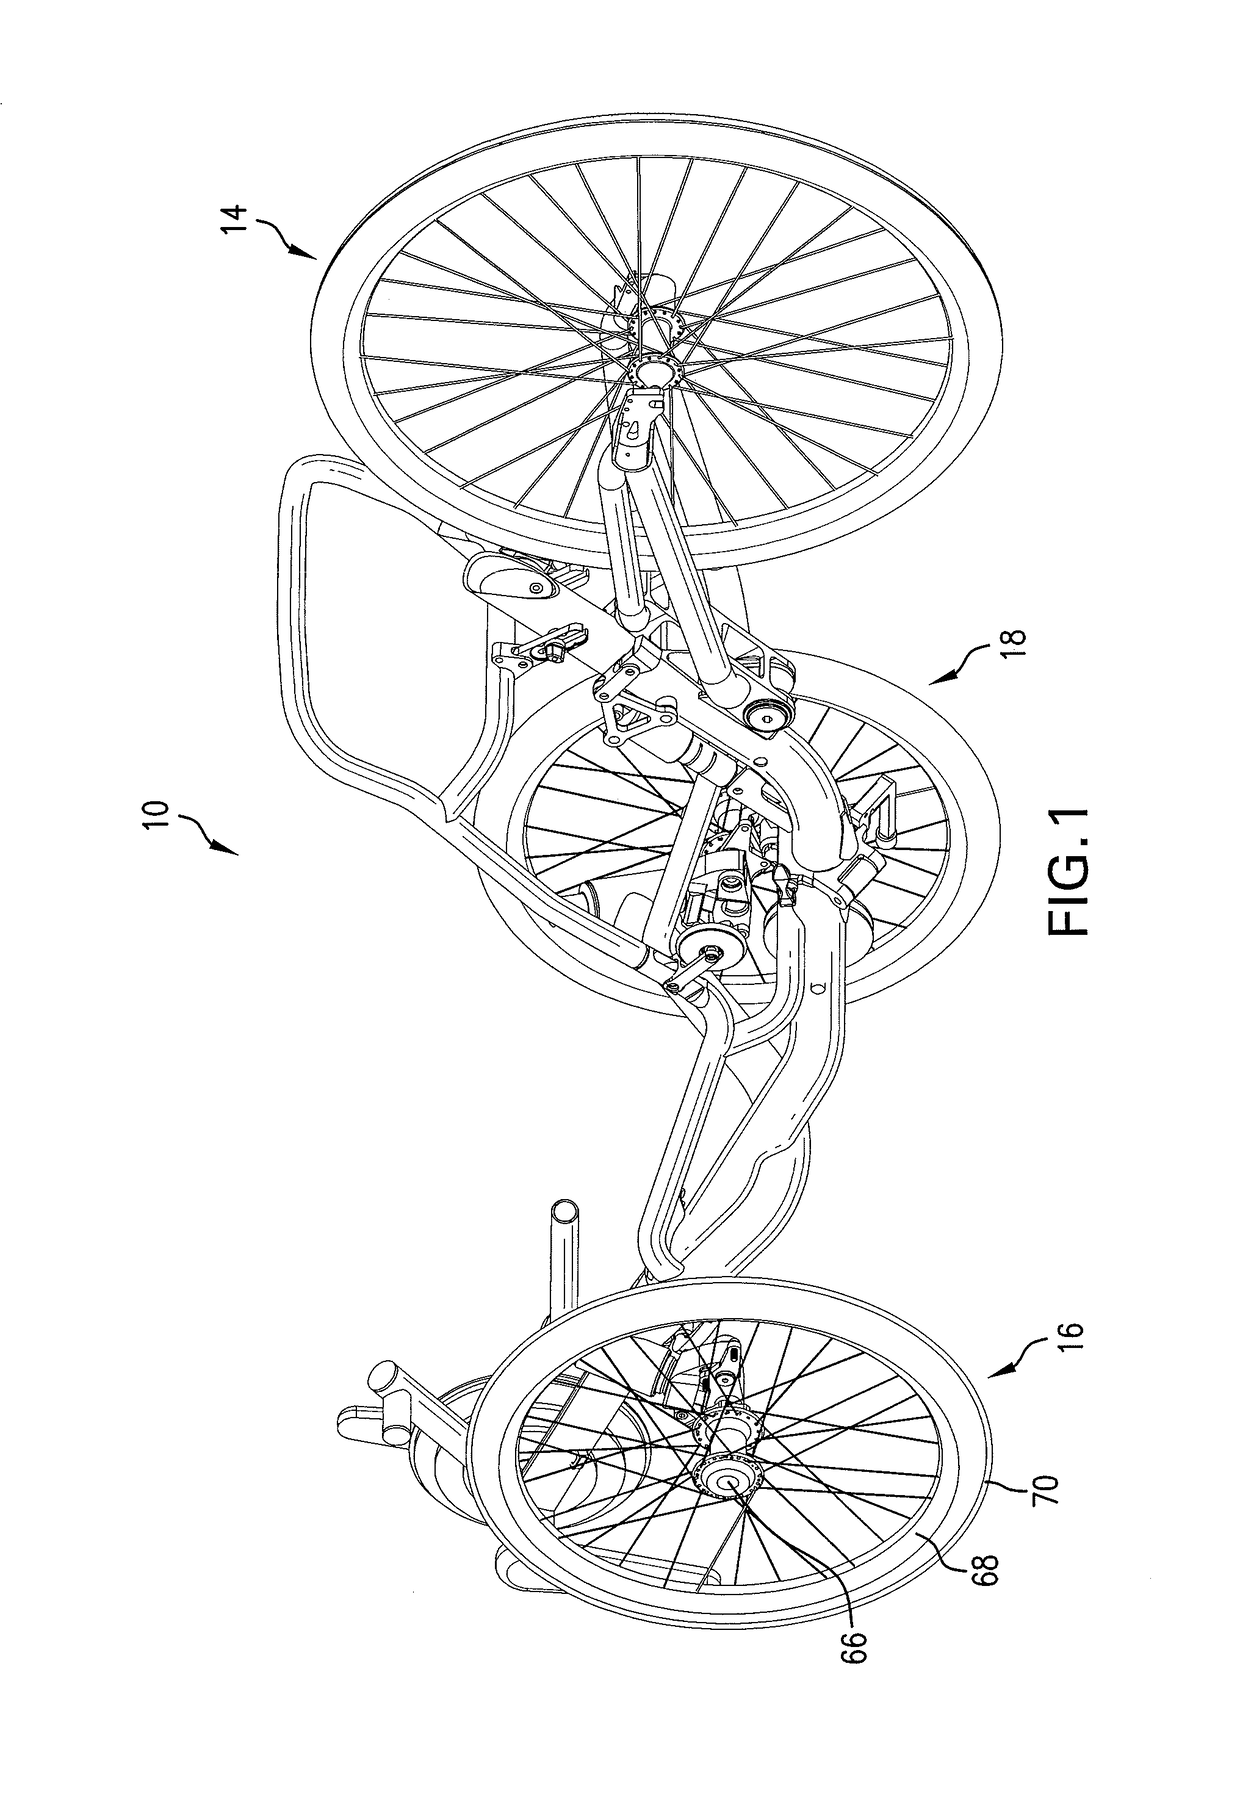 Suspended spindle assembly for recumbent tricyles